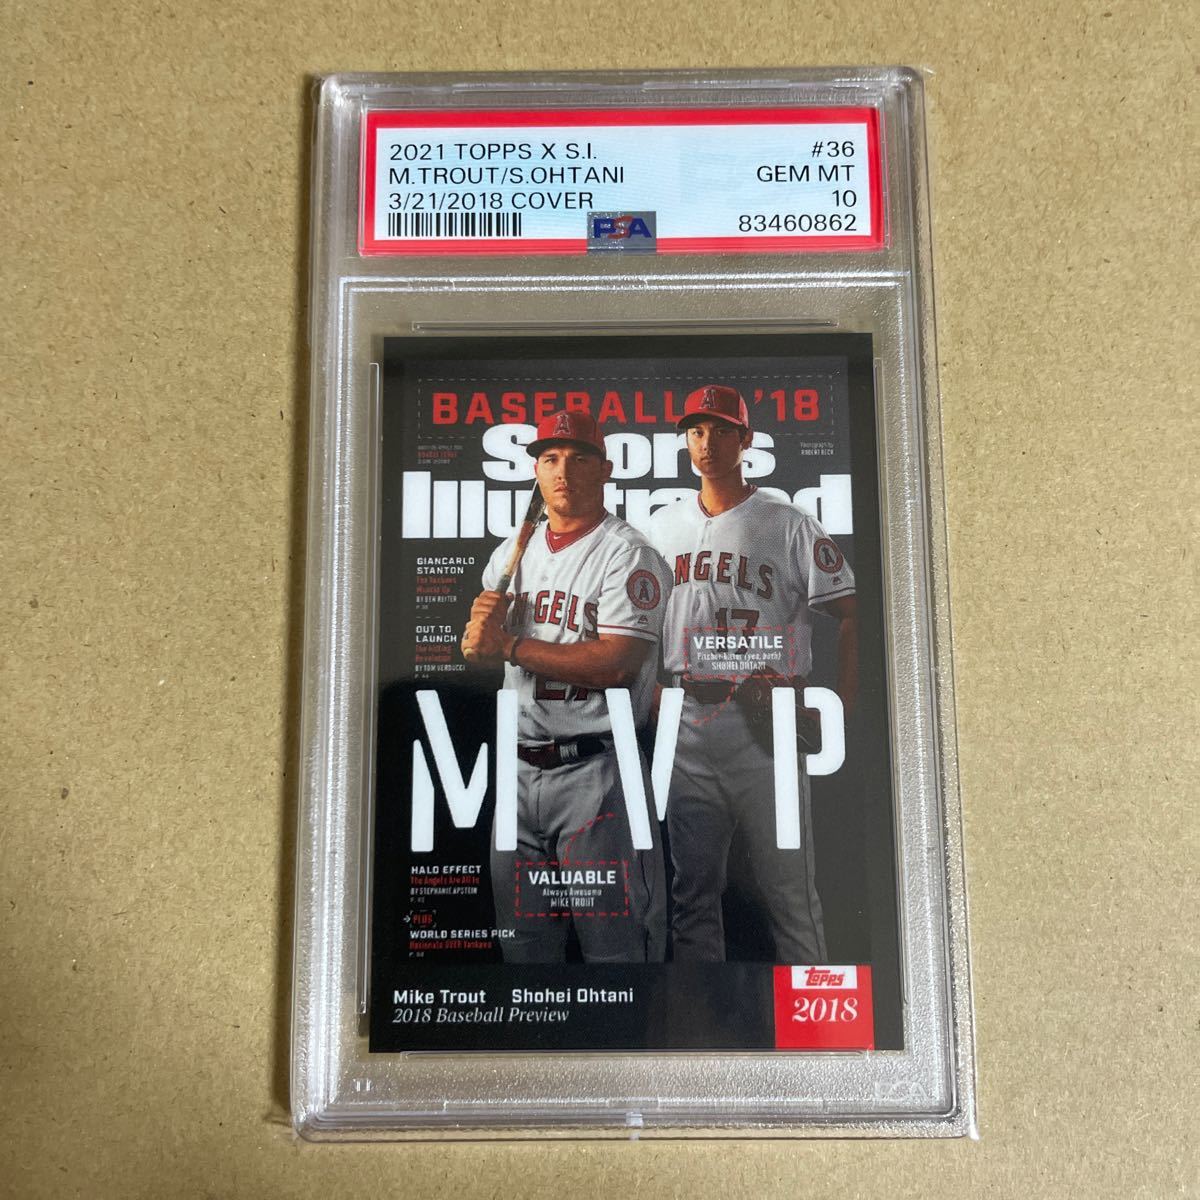 【PSA10】GEM MINT 2021 Topps x Sports Illustrated 大谷翔平 マイク・トラウト MVP 2018 Cover #36 SHOHEI OHTANI MIKE TROUT PSA鑑定_画像1